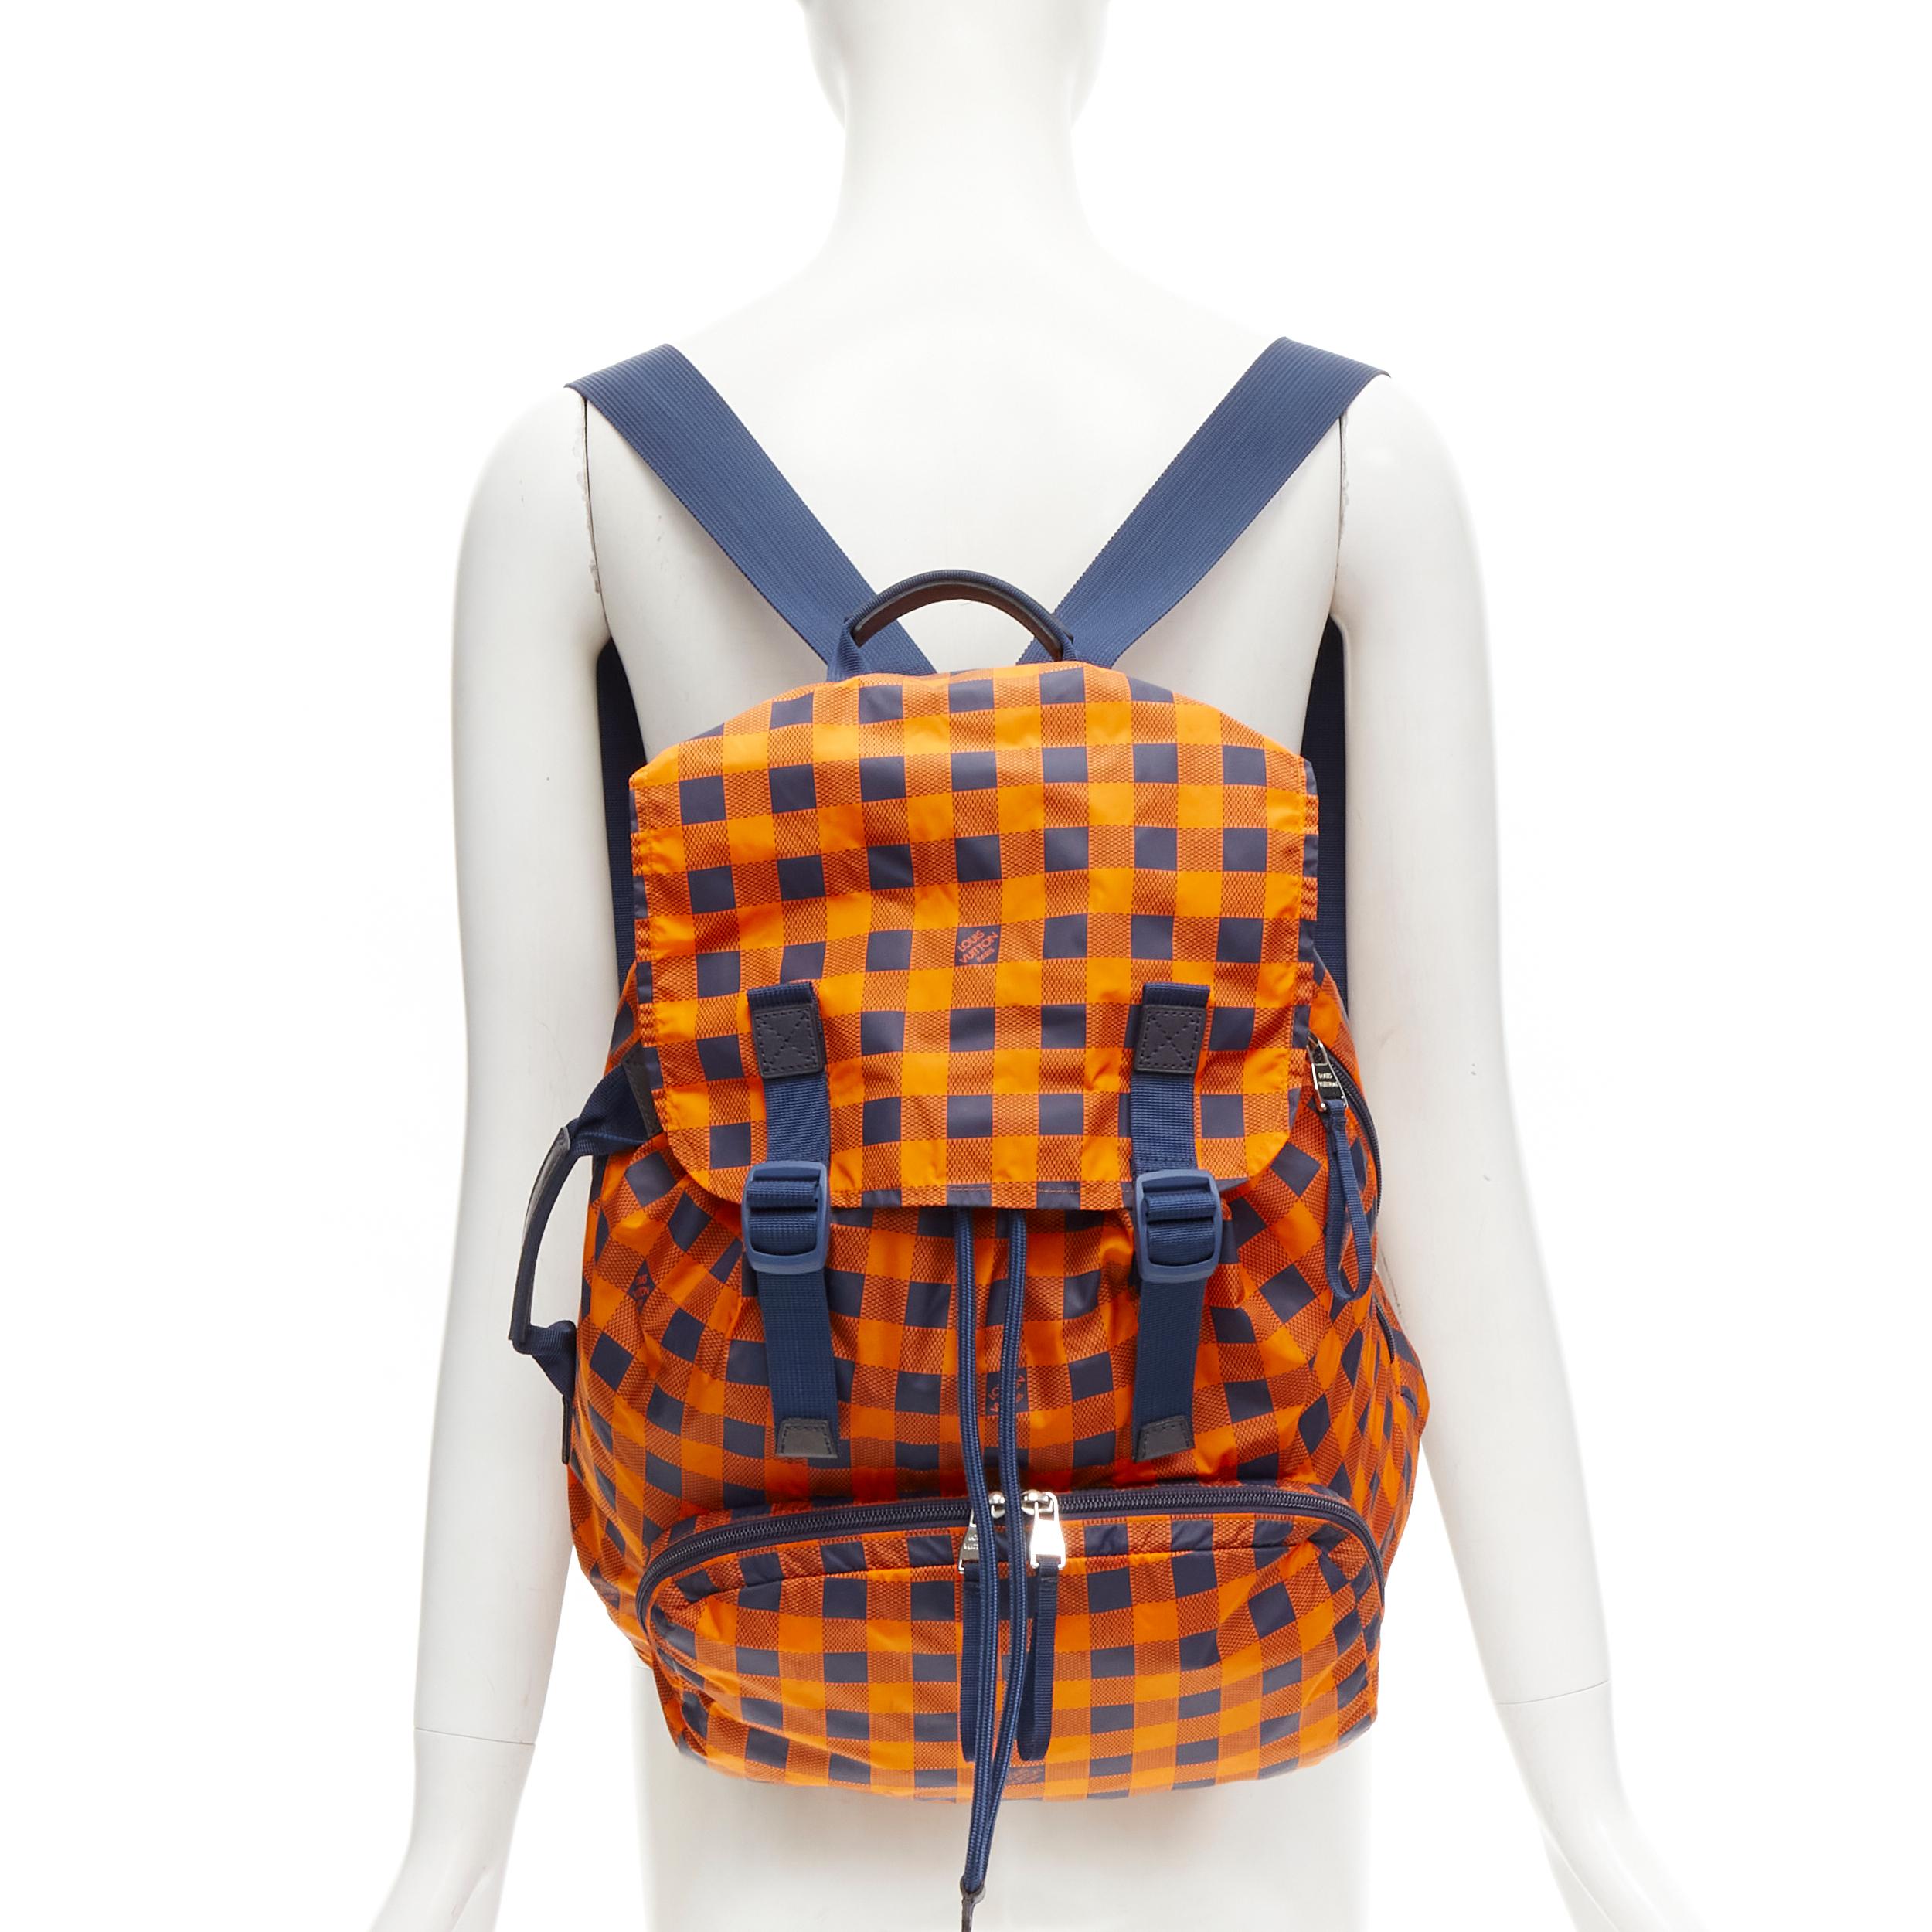 LOUIS VUITTON Aventure orange blue LV Damier nylon foldable backpack
Reference: CNLE/A00199
Brand: Louis Vuitton
Designer: Marc Jacobs
Collection: Cup 2012
Material: Nylon, Leather
Color: Orange, Navy
Pattern: Checkered
Closure: Drawstring
Lining: